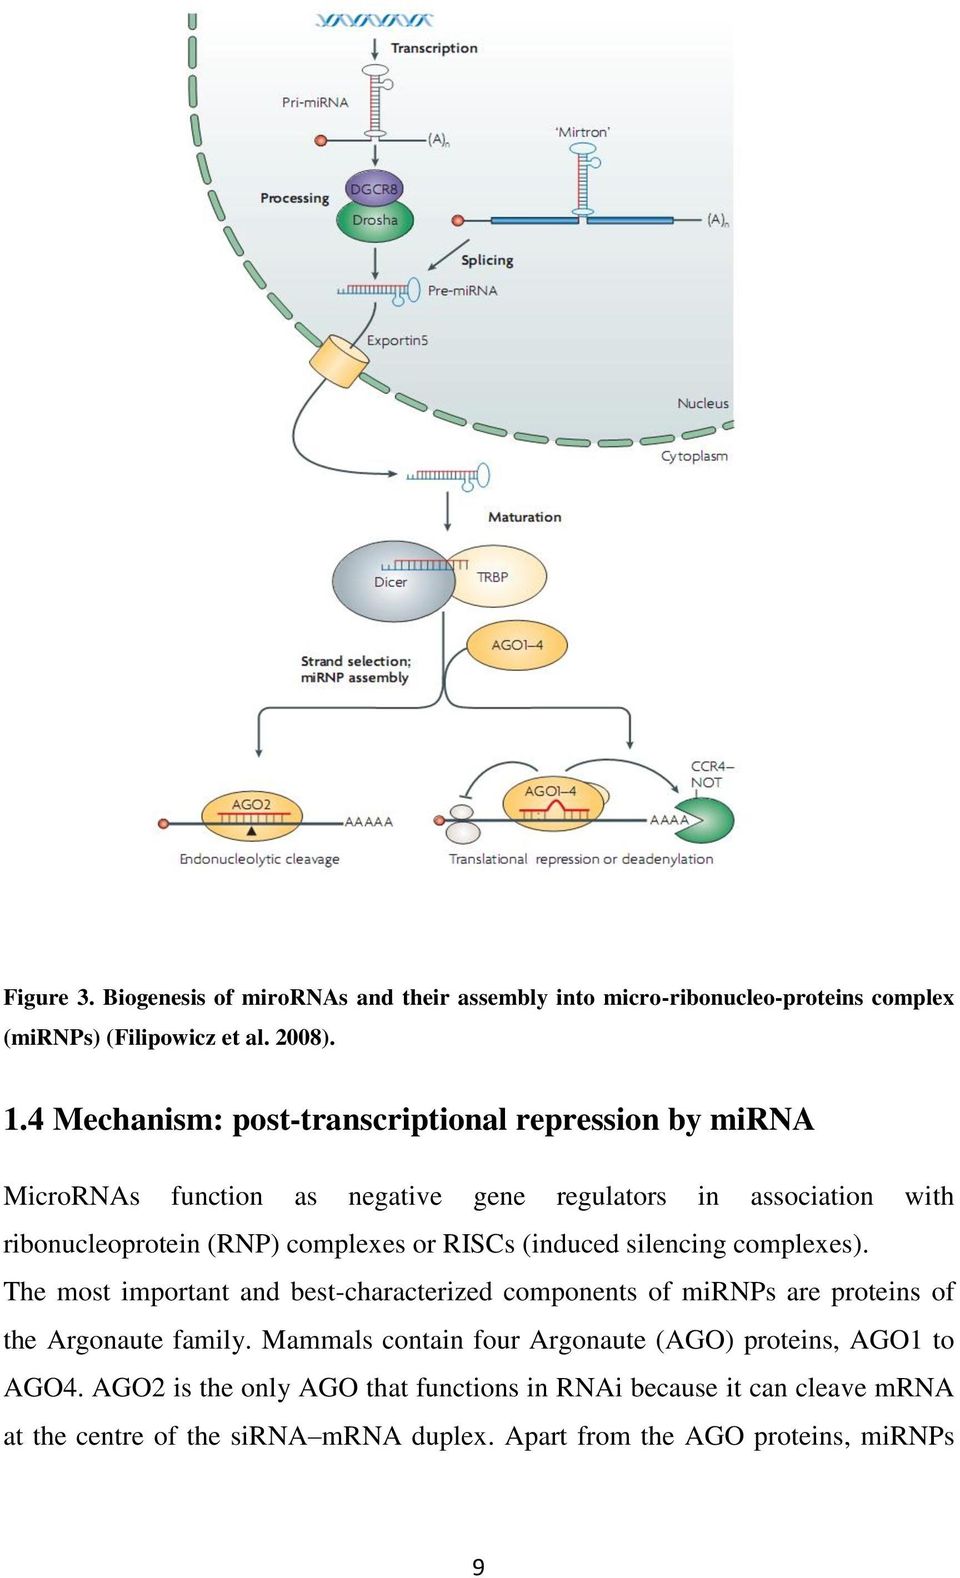 RISCs (induced silencing complexes). The most important and best-characterized components of mirnps are proteins of the Argonaute family.